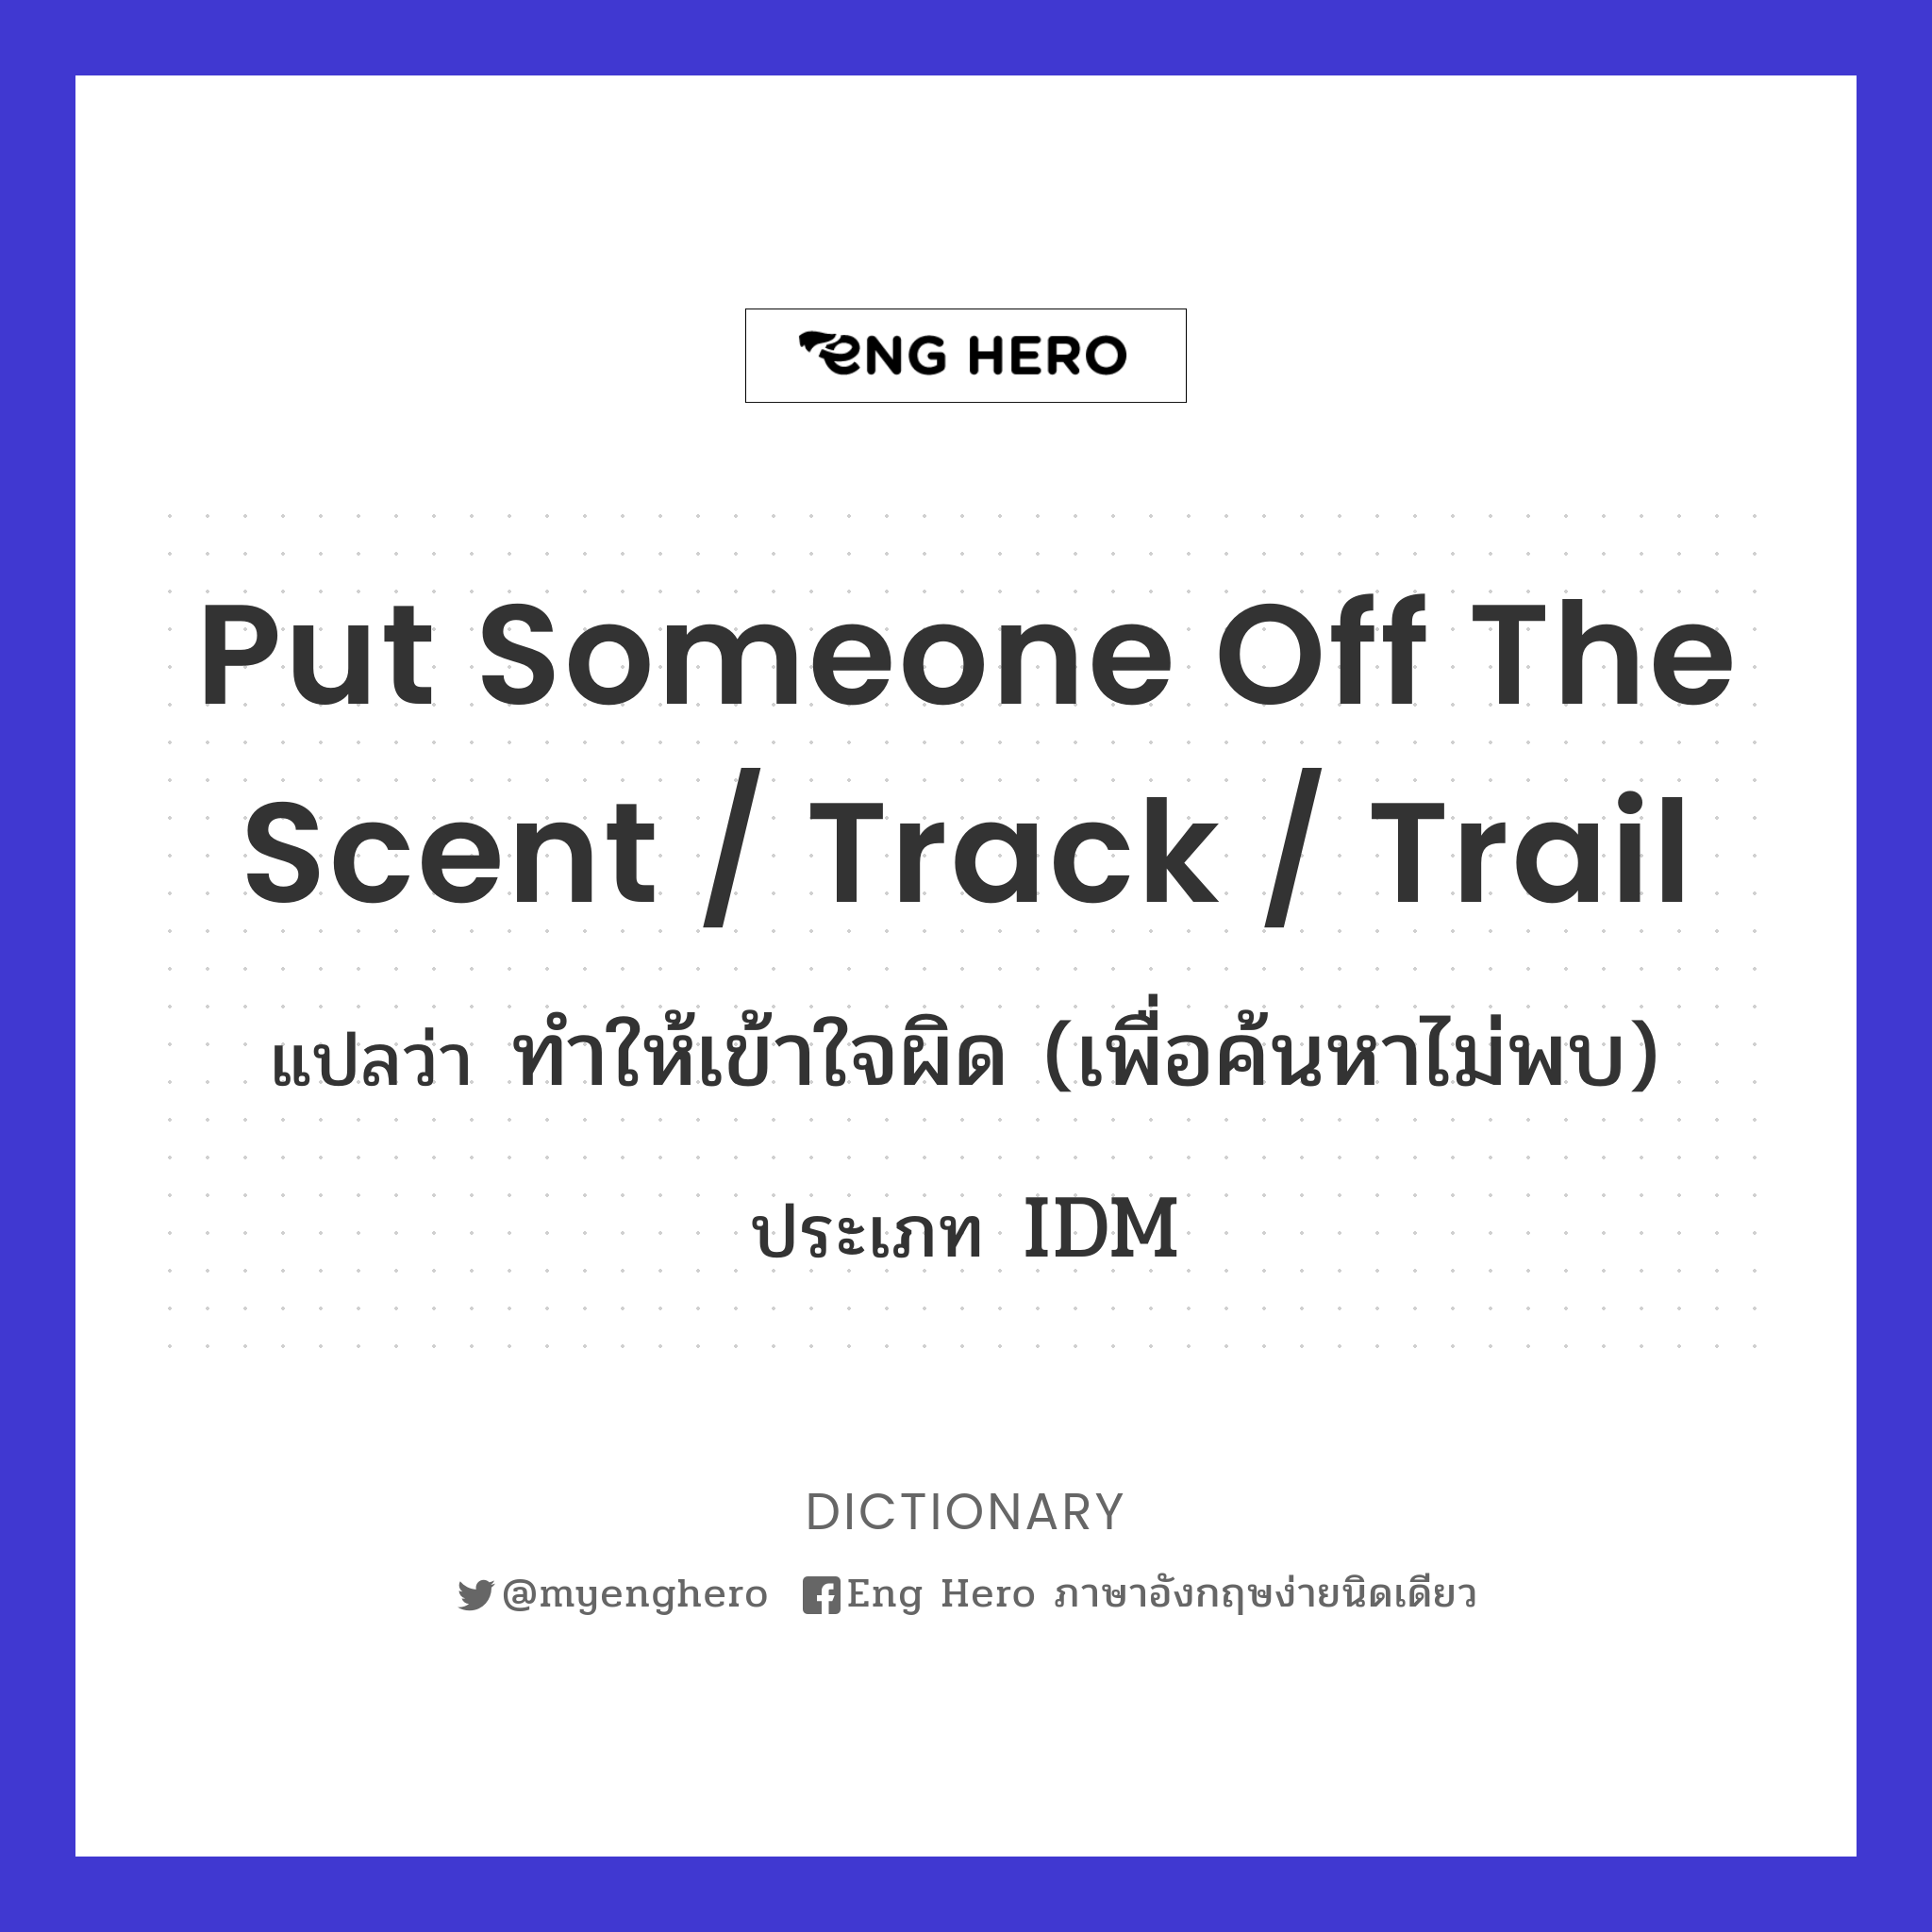 put someone off the scent / track / trail